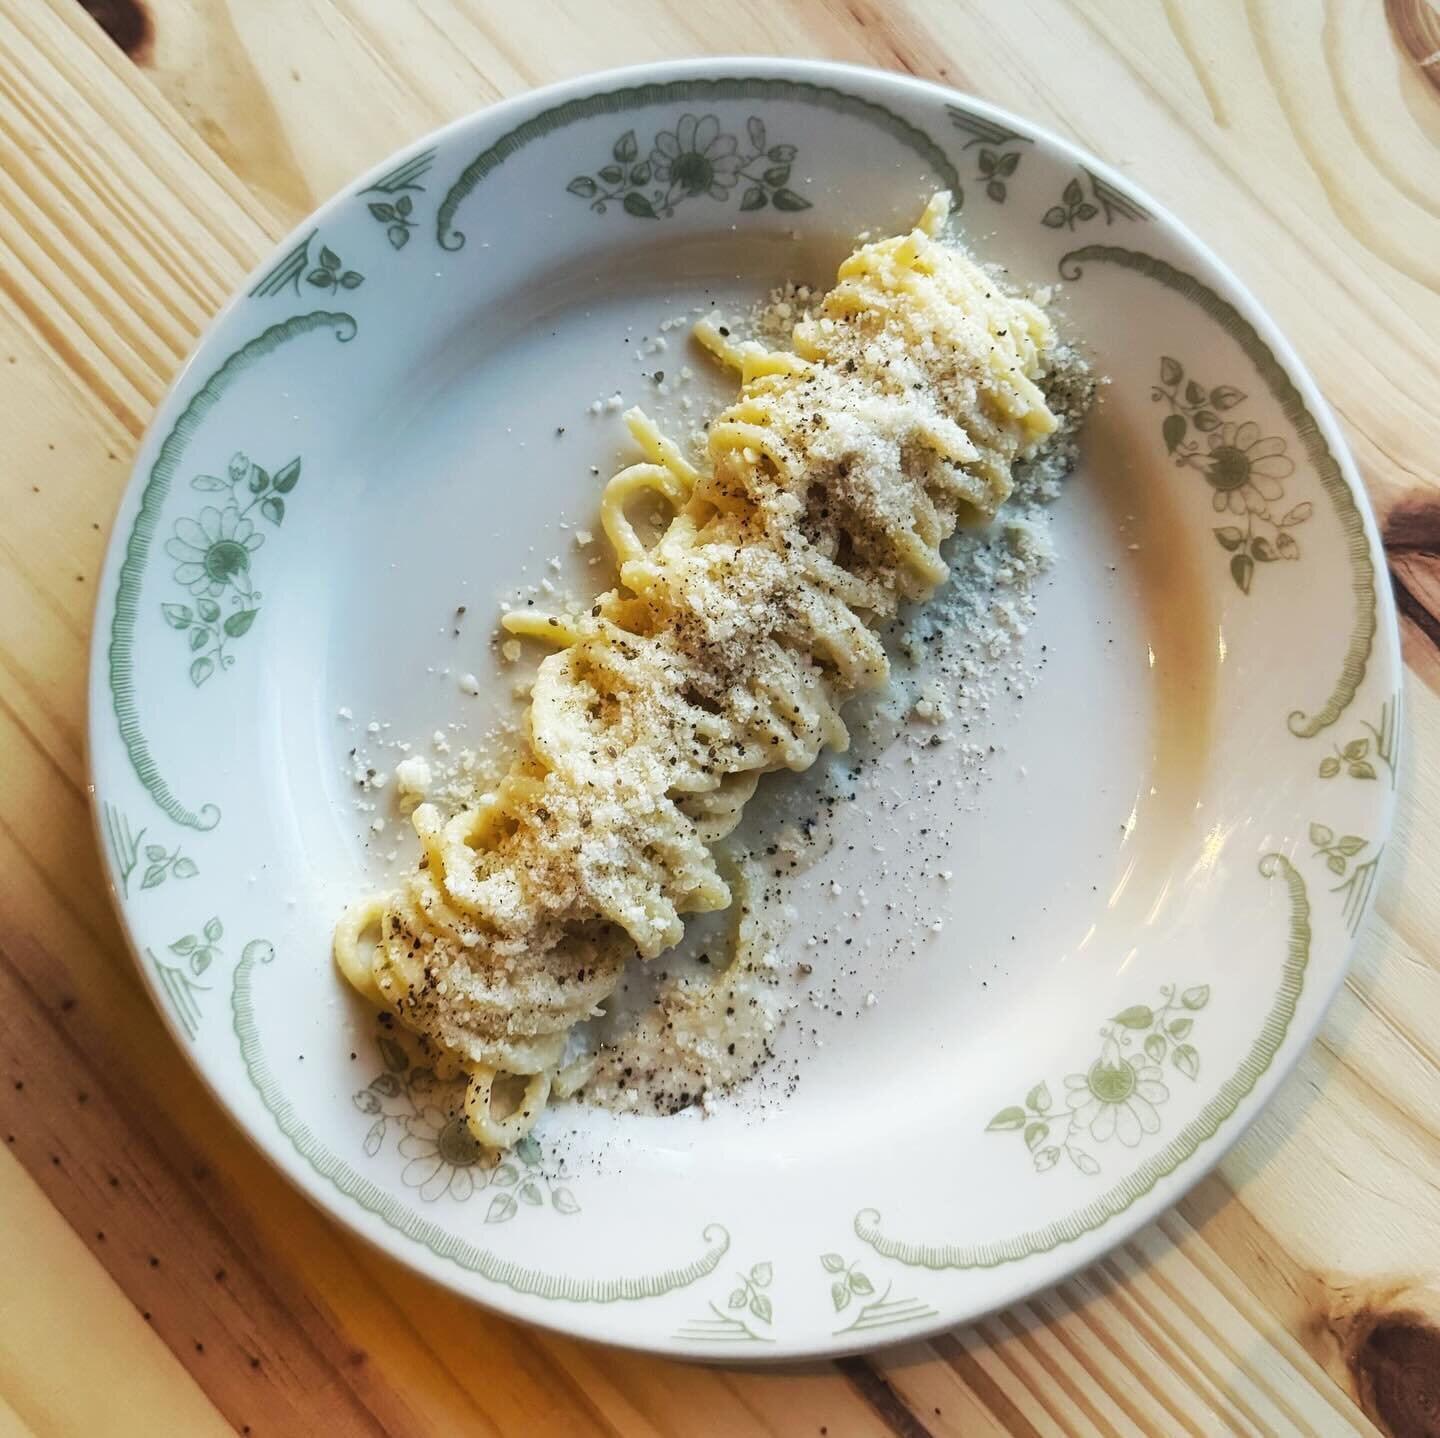 There&rsquo;s spaghetti and then there&rsquo;s spaghetti &mdash; right?! This is our Cacio e Pepe, saucing our housemade spaghetti noodle made with flour imported from Italy. No question that we love spaghetti around here! Happy National Spaghetti Da